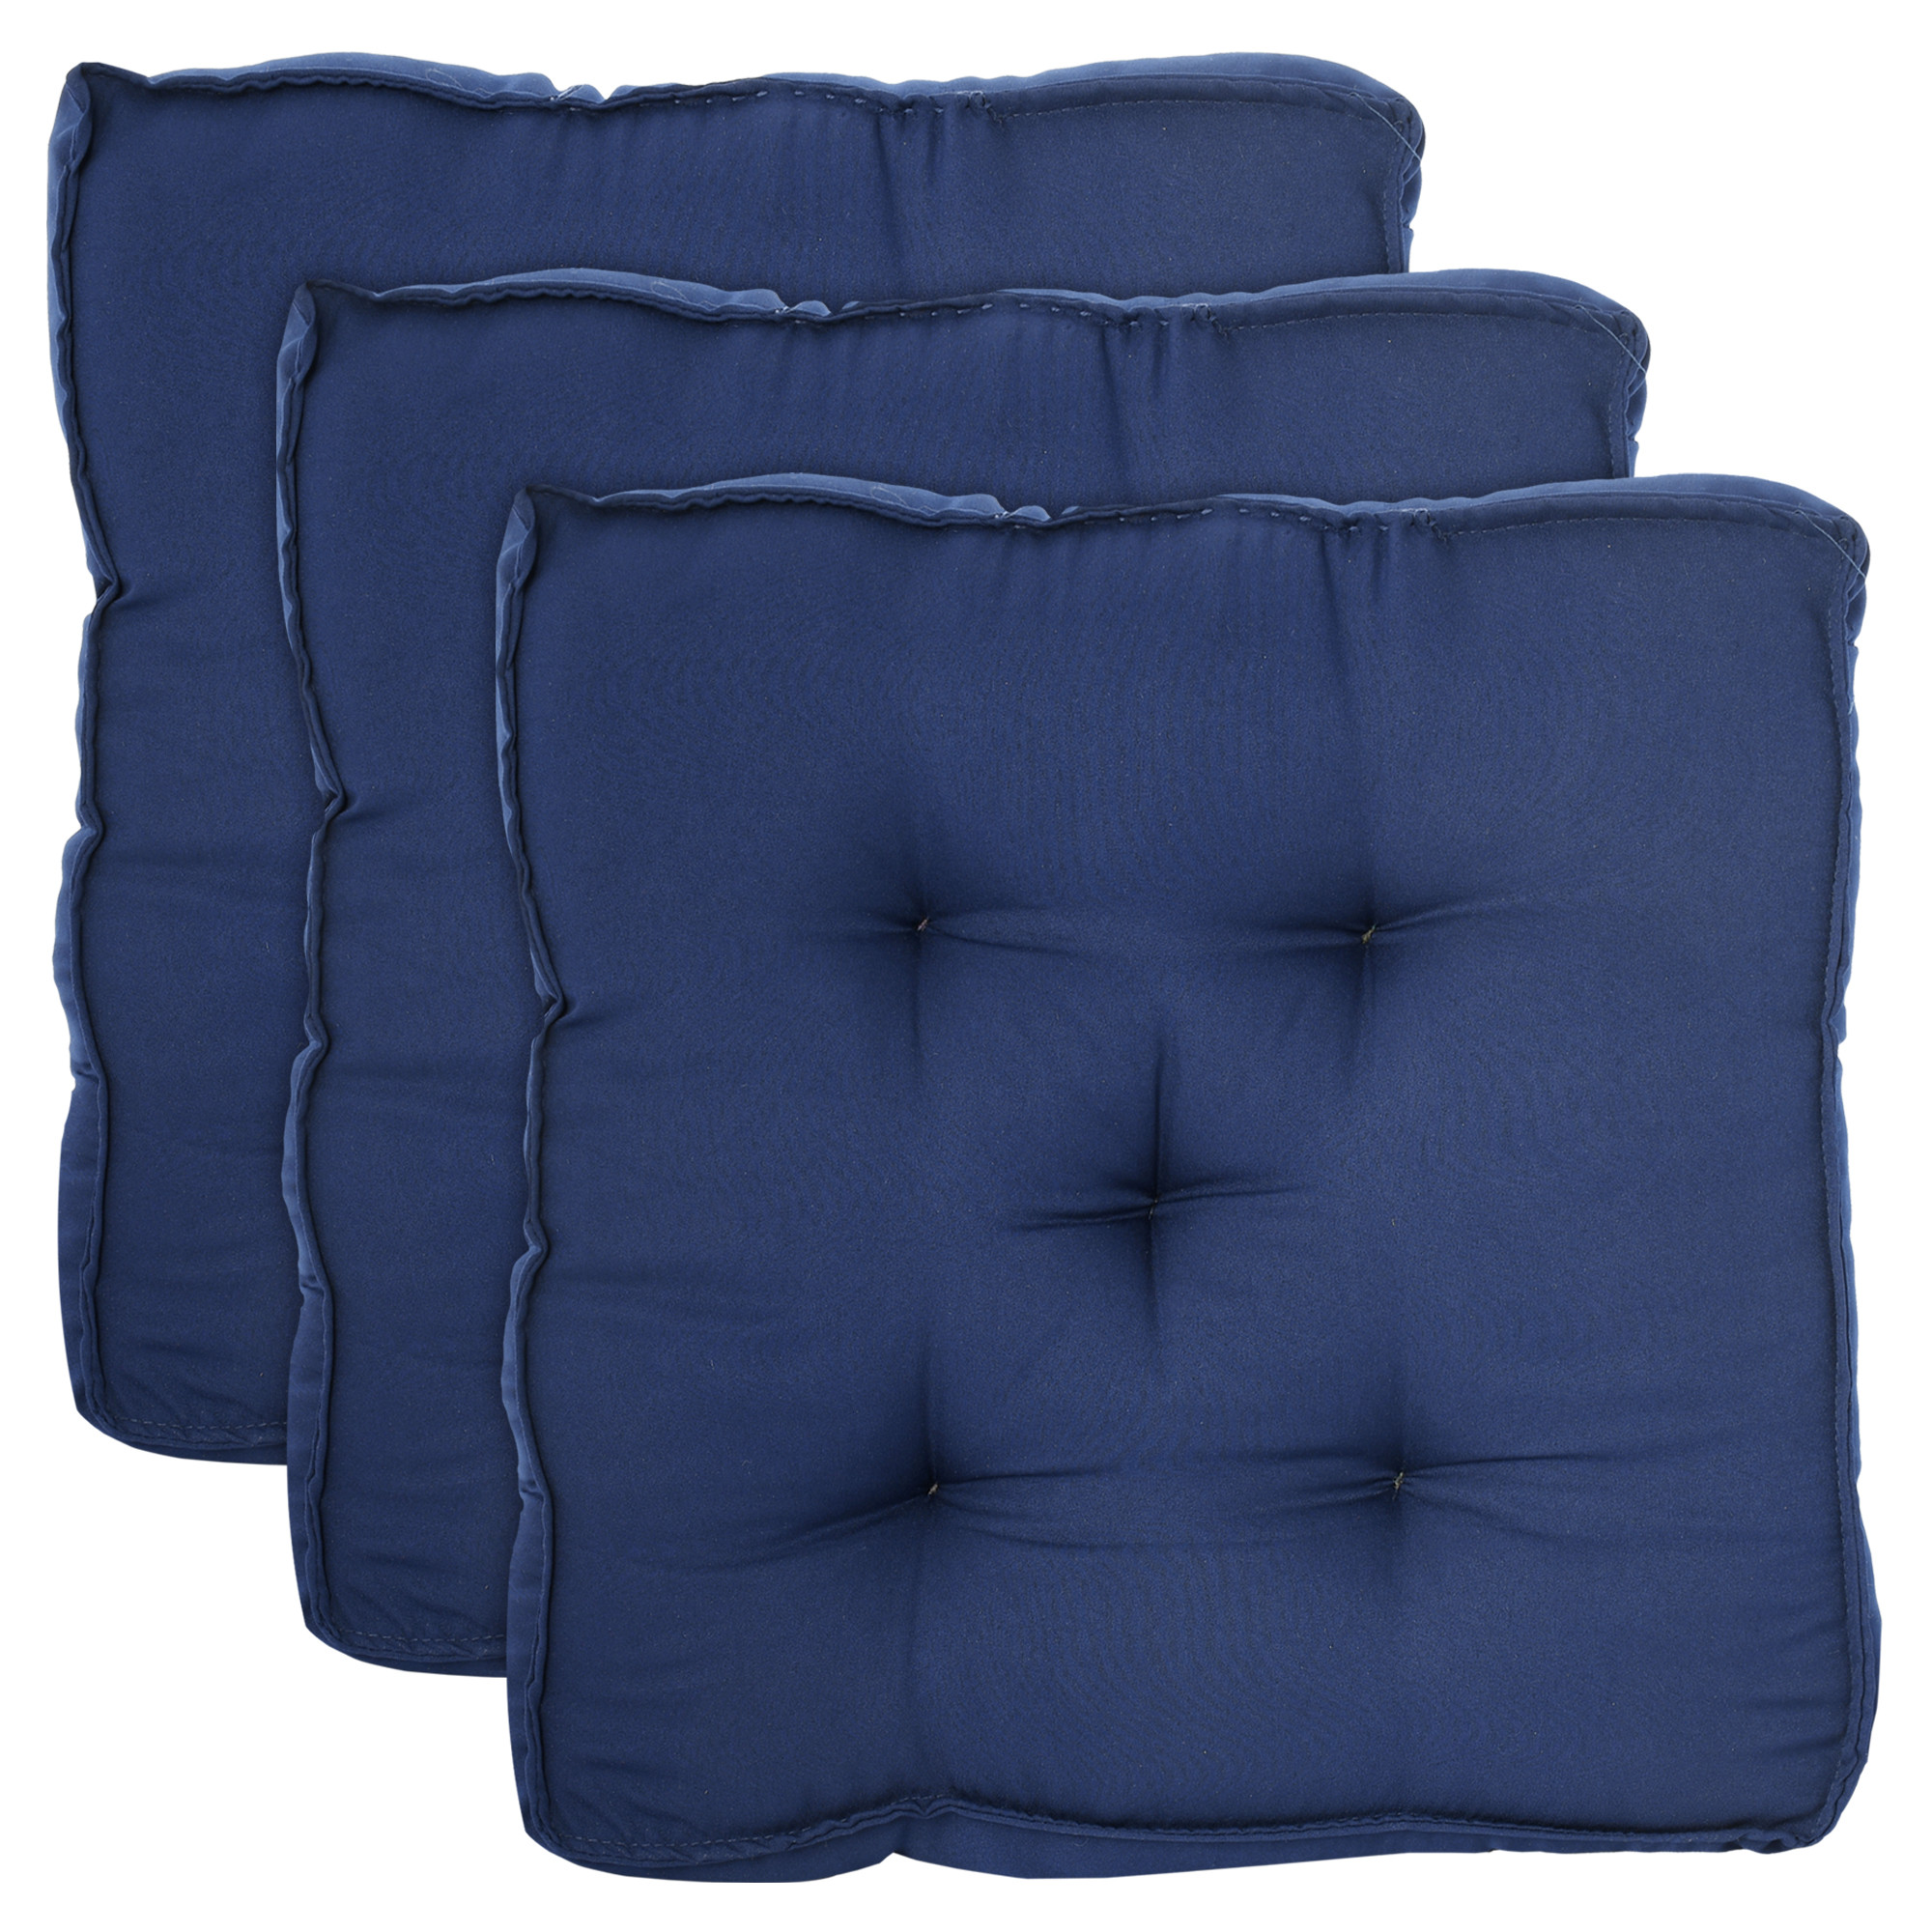 Kuber Industries Microfiber Square Chair Pad Seat Cushion For Car Pad, Office Chair, Indoor/Outdoor, Dining Living Room, Kitchen, 18*18 Inch (Navy Blue)